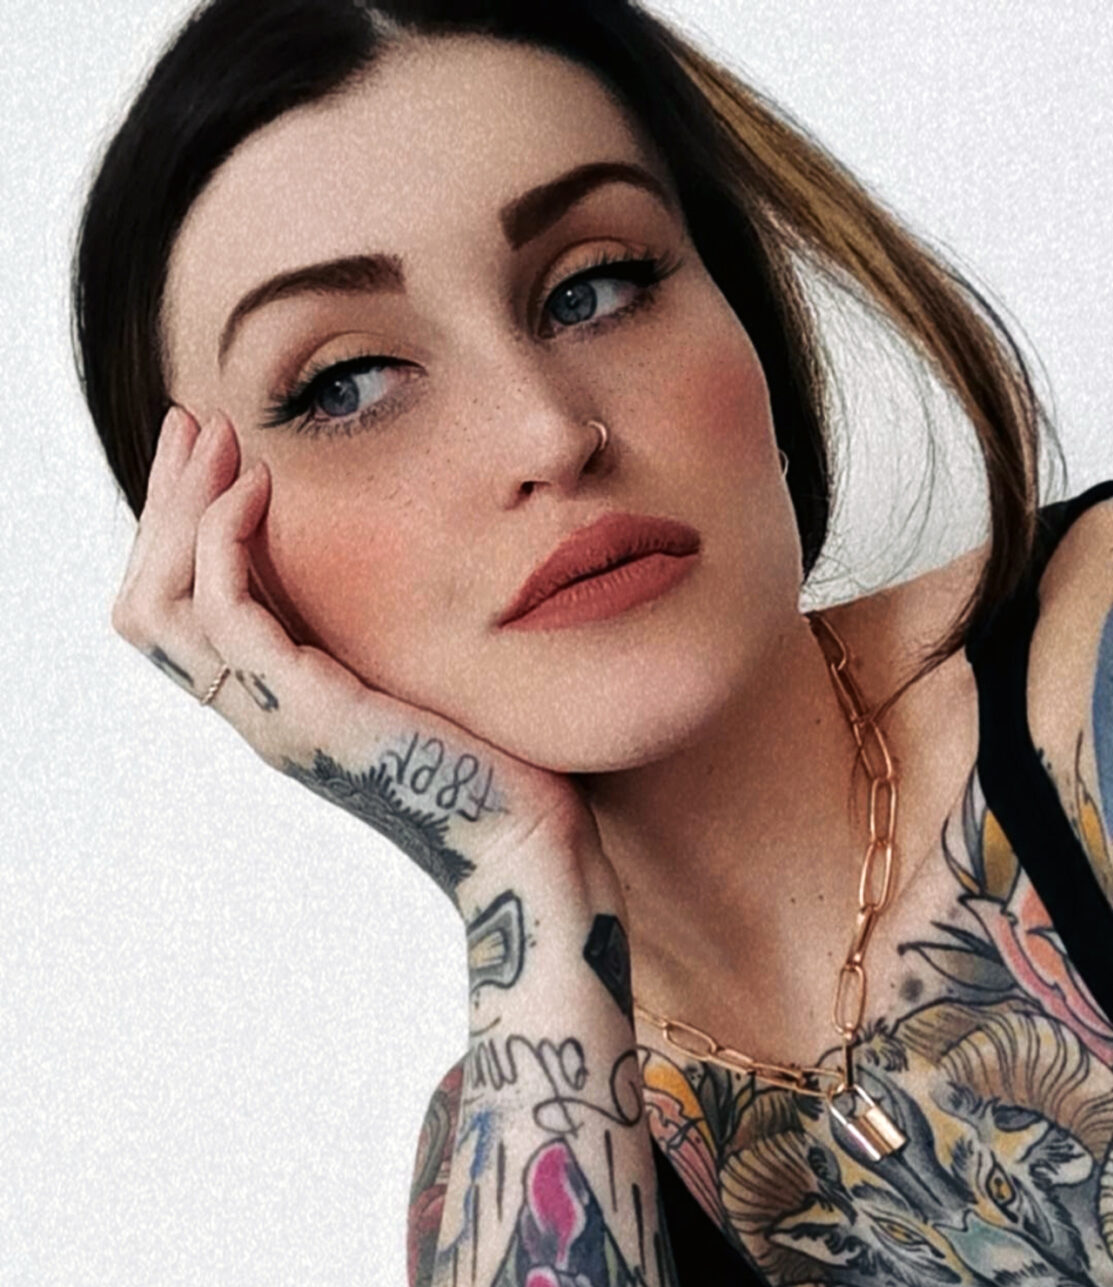 Amy, the German girl who is just crazy about Neo Traditional - Tattoo Life